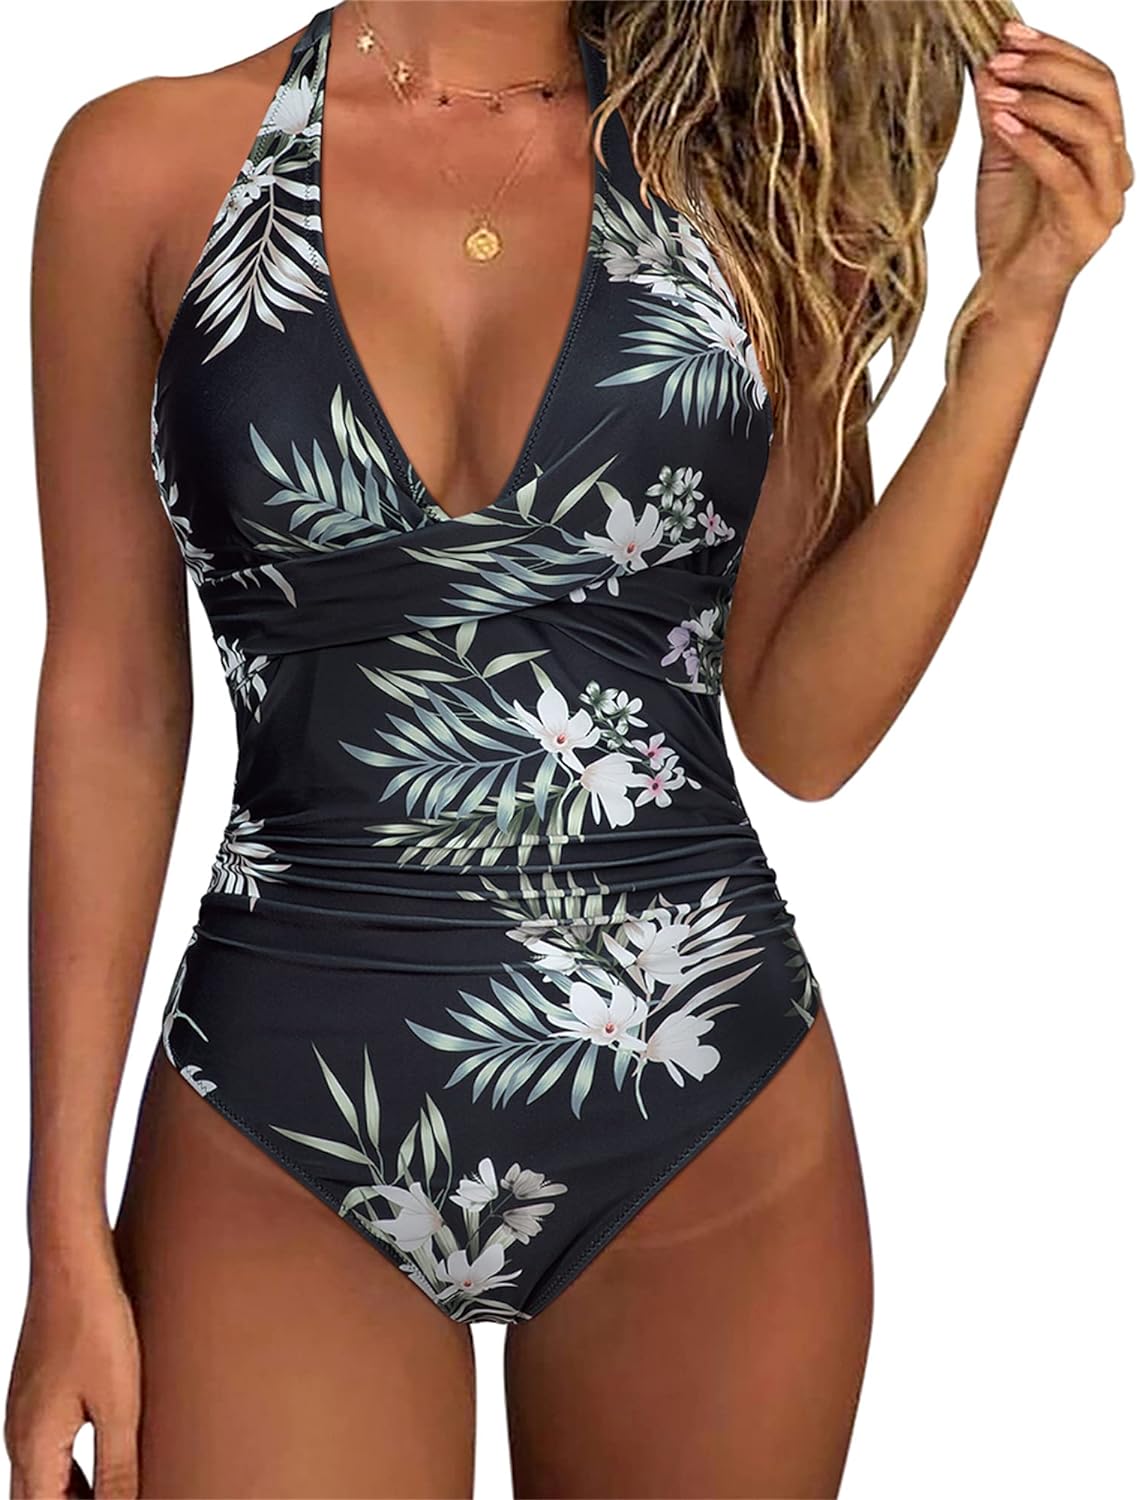 Women Sexy Tummy Control One Piece Swimsuits Halter Push Up Bathing Suits-A